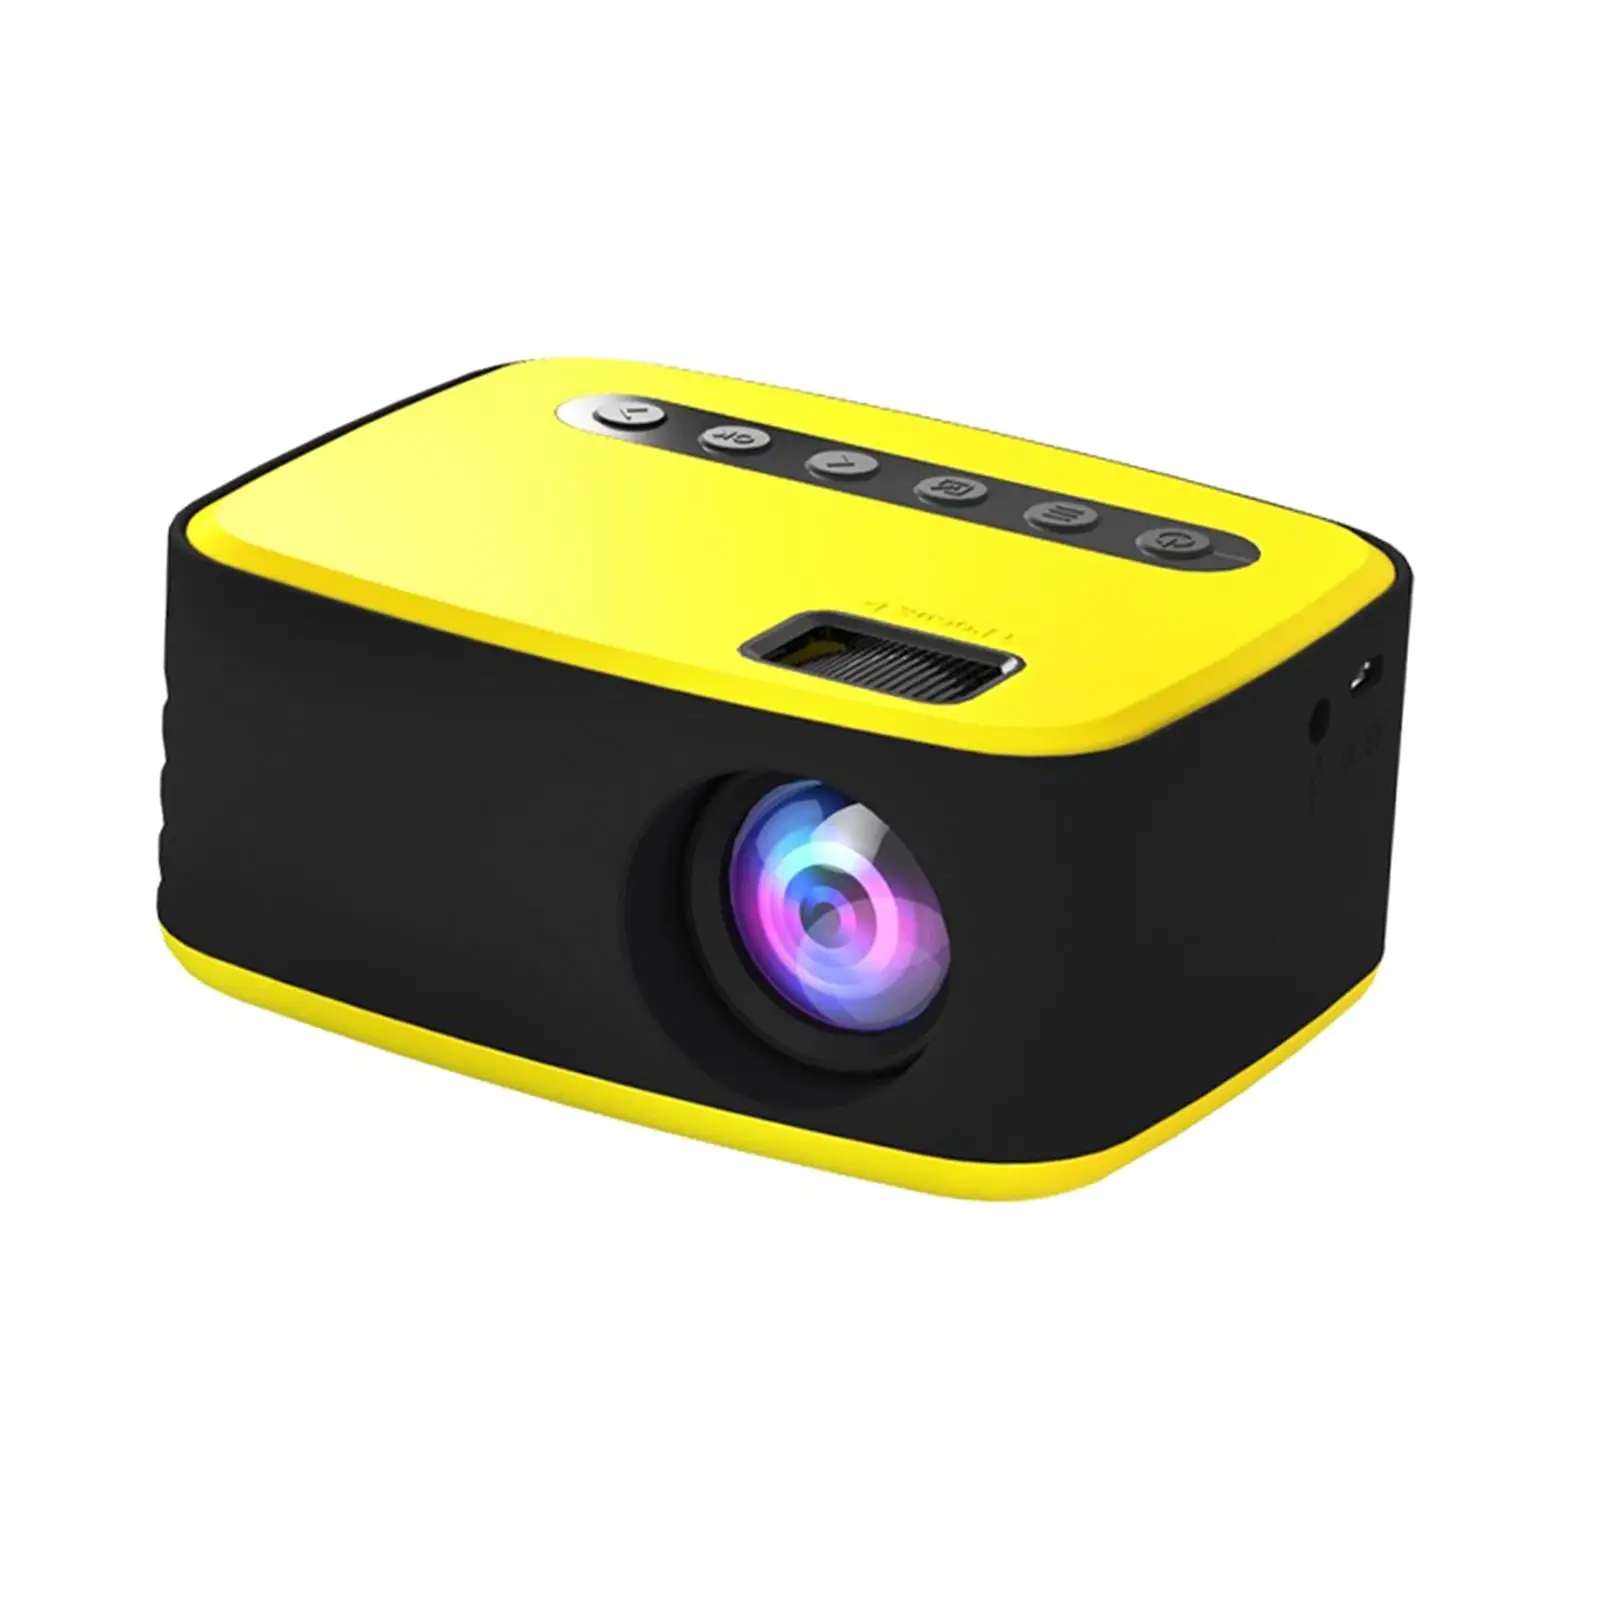 Projector Ultra Compact Portable Projector Pocket Projector for Office Theater Watch Anywhere Bedroom Inside Outside Kids Adults